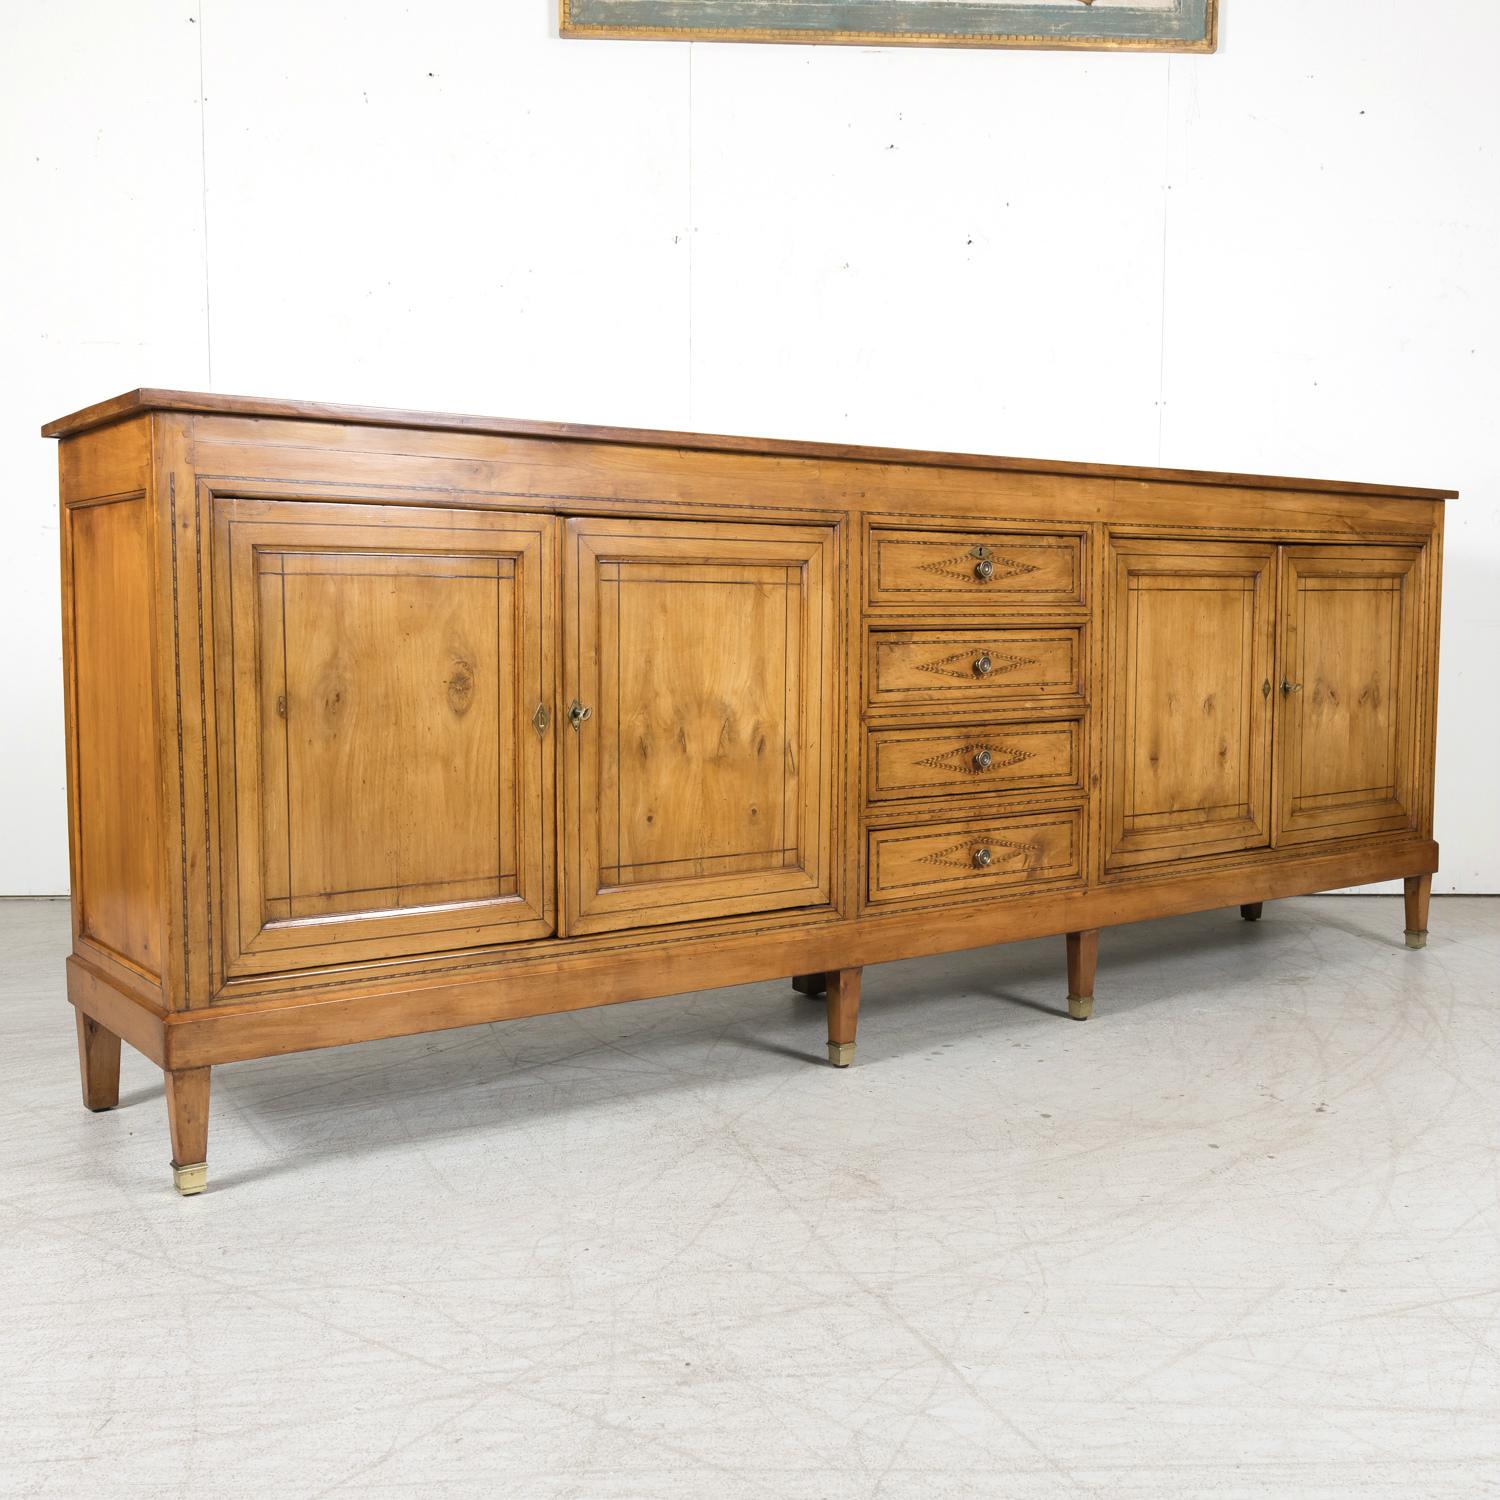 Late 19th Century  19th Century French Louis XVI Style Cherry Enfilade Buffet with Fruitwood Inlay